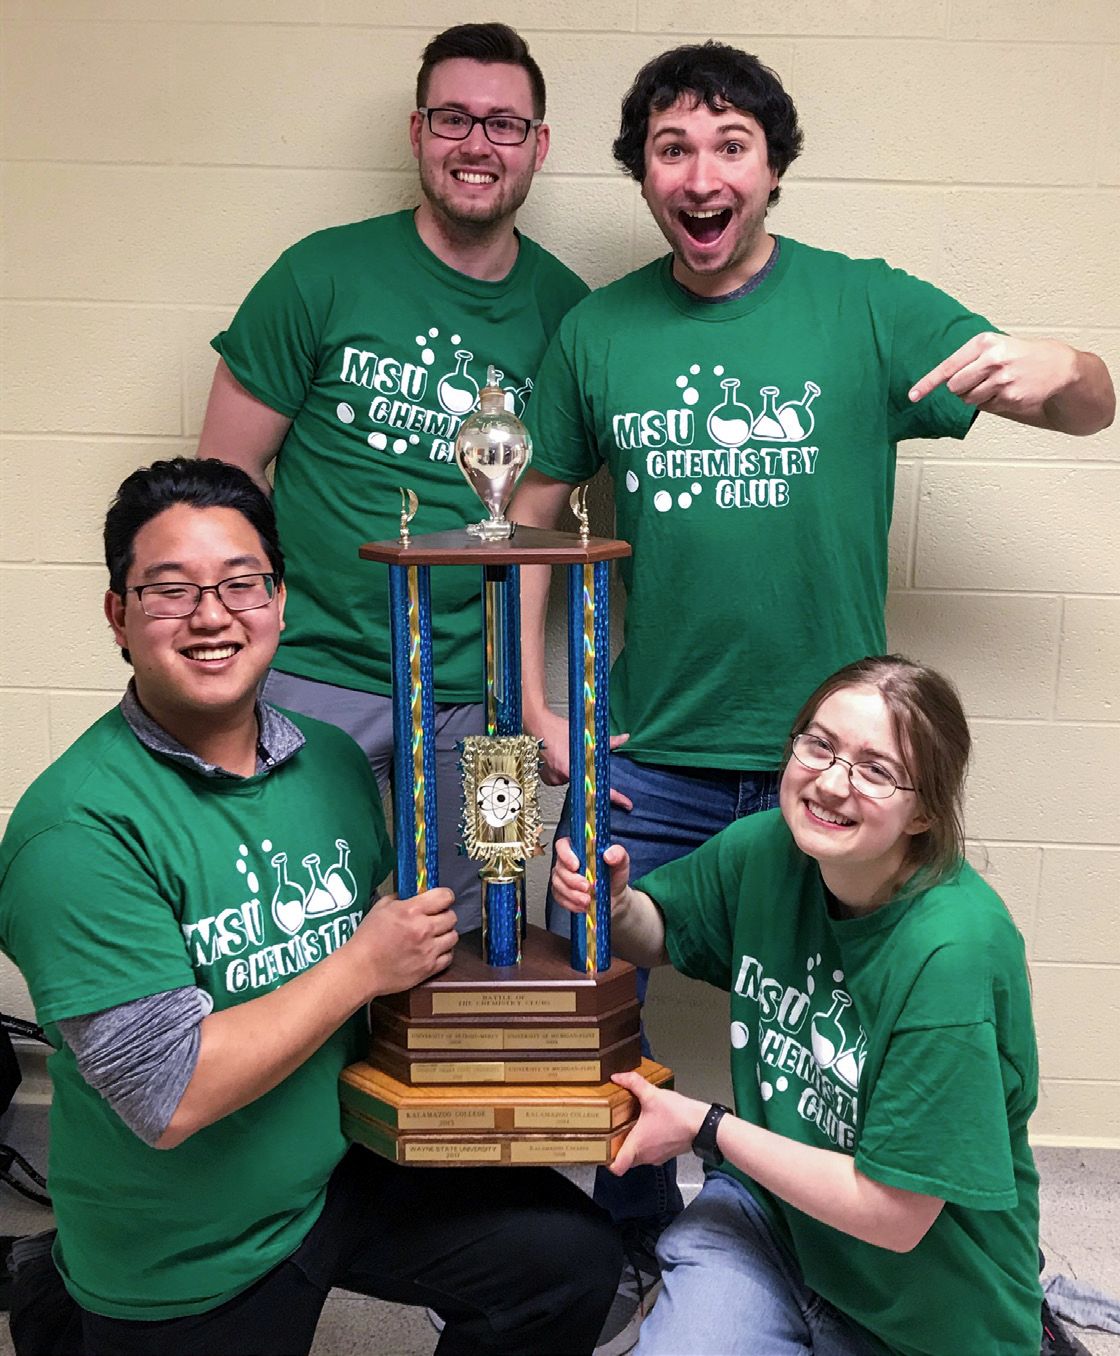 Chemistry Club E-board members (l to r) Michael Schwanitz, Joseph Hendrian, Austin King (President), and Natasha Perry (Vice President) displayed their extensive chemistry knowledge and unrivaled teamwork to bring home the trophy for MSU.